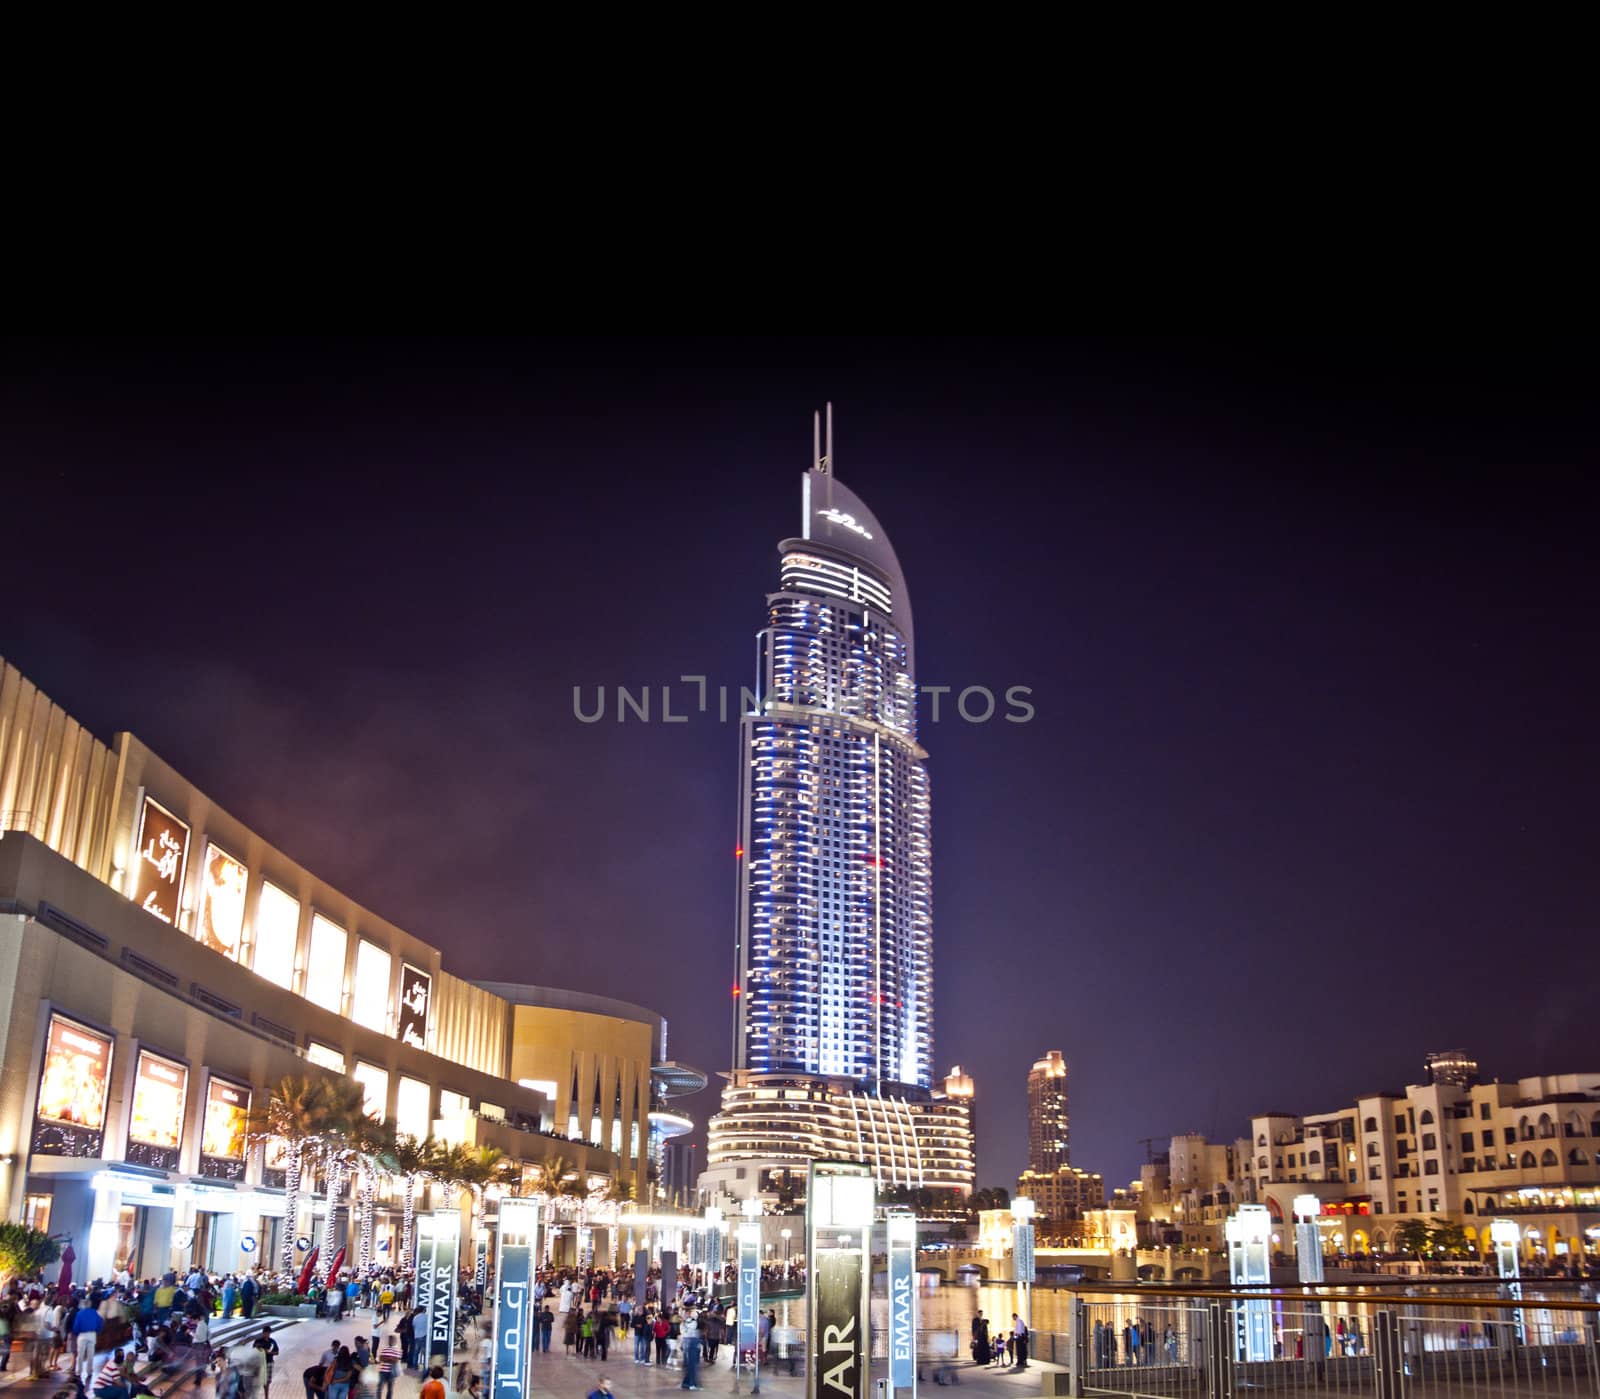 The Address Hotel, the luxurious hotel located in Downtown Dubai